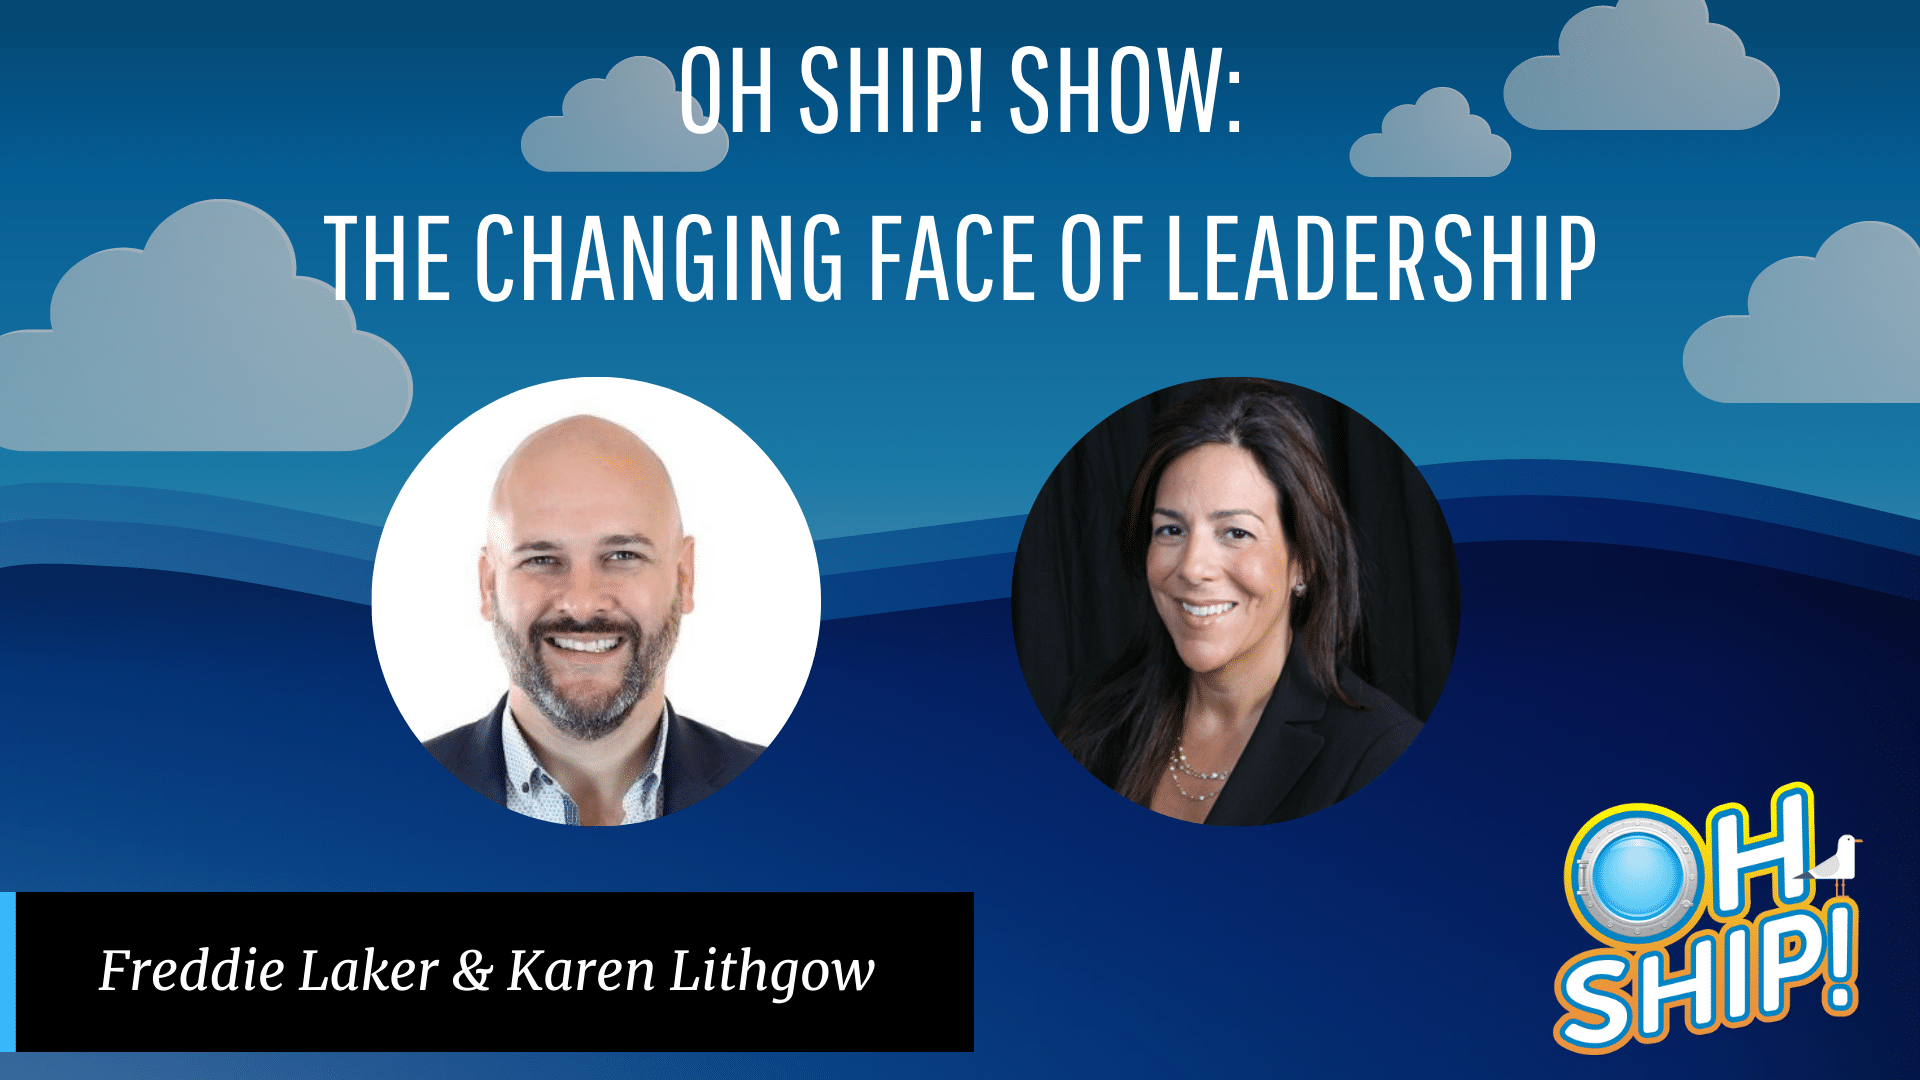 A promotional image for the "Oh Ship! Show" features the text "The Changing Face of Leadership." It includes headshots of Freddie Laker and Karen Lithgow. The background is a blue sky with clouds, and the "Oh Ship!" logo graces the bottom right corner.